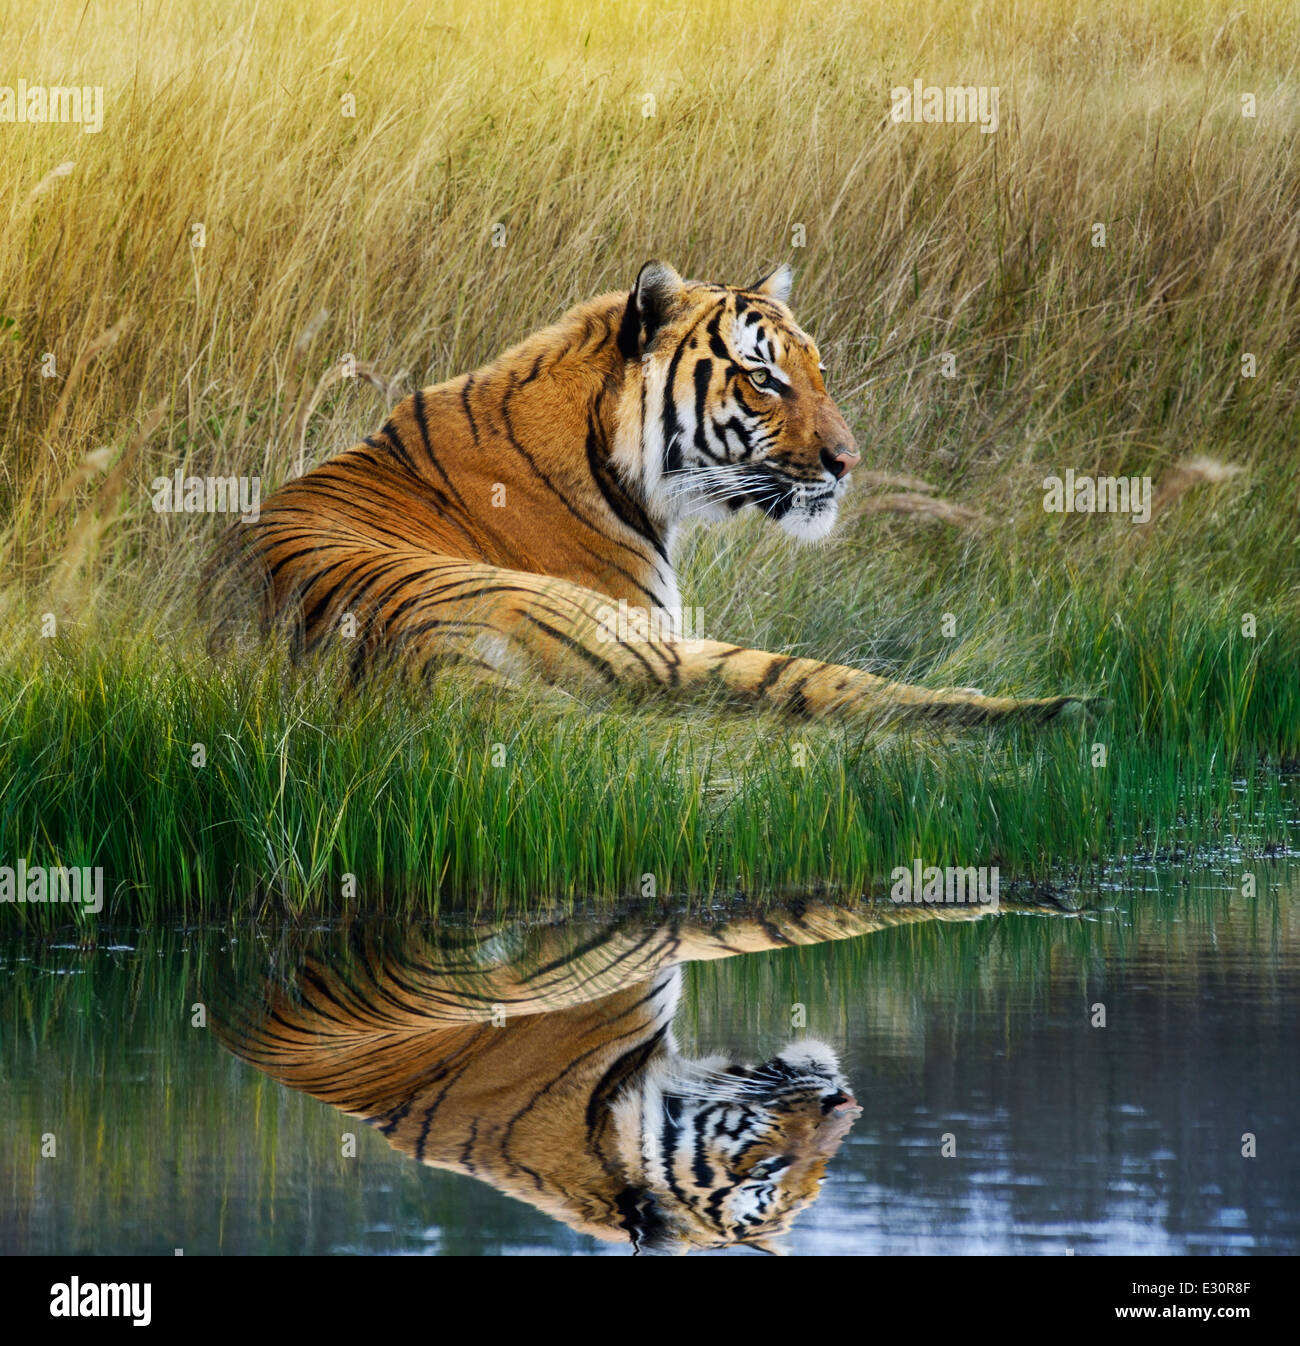 Tiger Relaxing On Grassy Bank With Reflection In Water Stock Photo